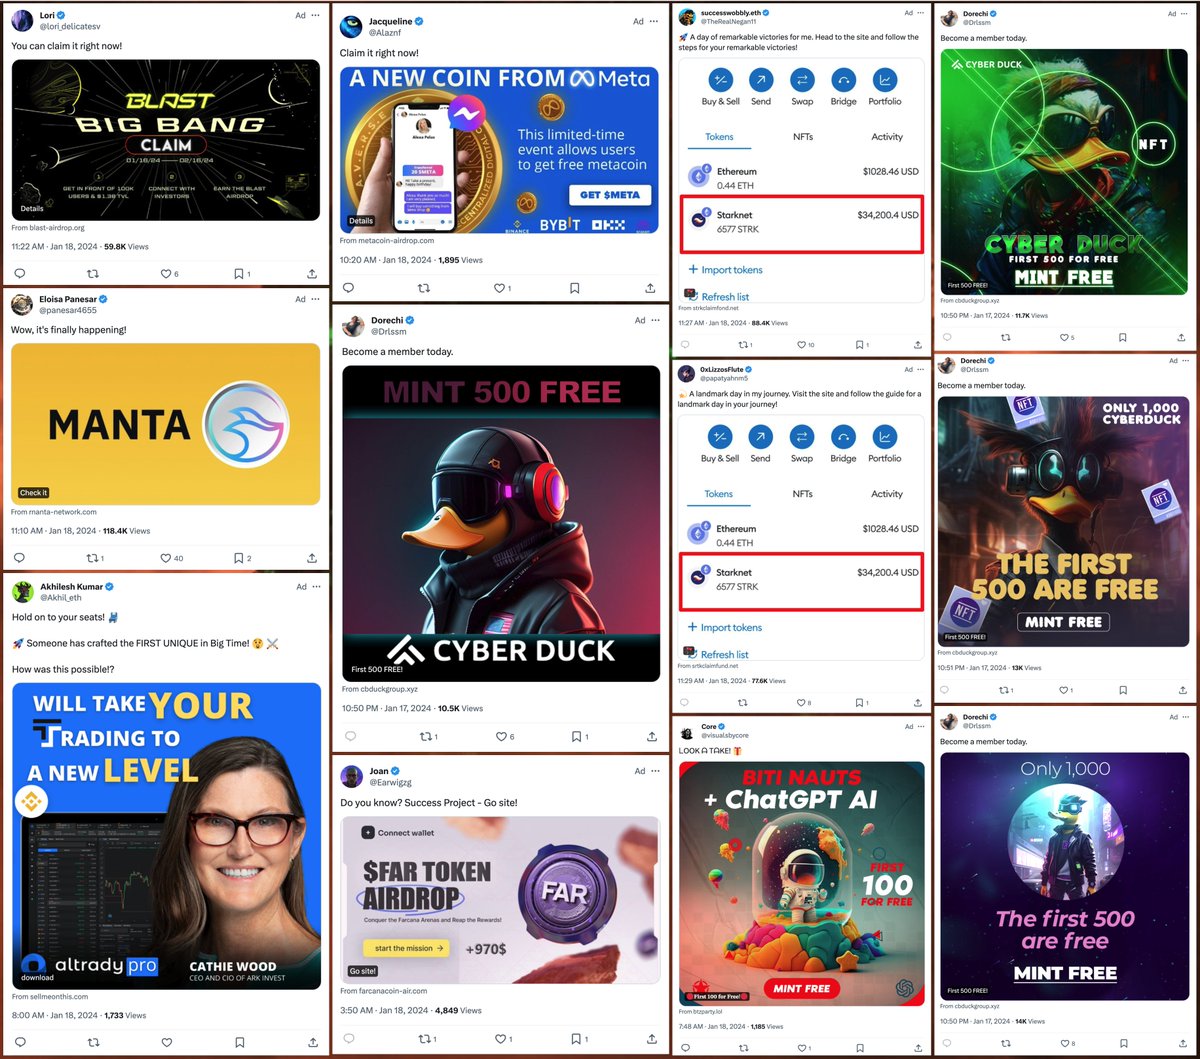 Cryptocurrency/NFT spam has become a recurring theme of advertising on X/Twitter in recent months. Over the course of a couple hours earlier today, I was served 12 different crypto spam ads, some of them repeatedly. cc: @ZellaQuixote